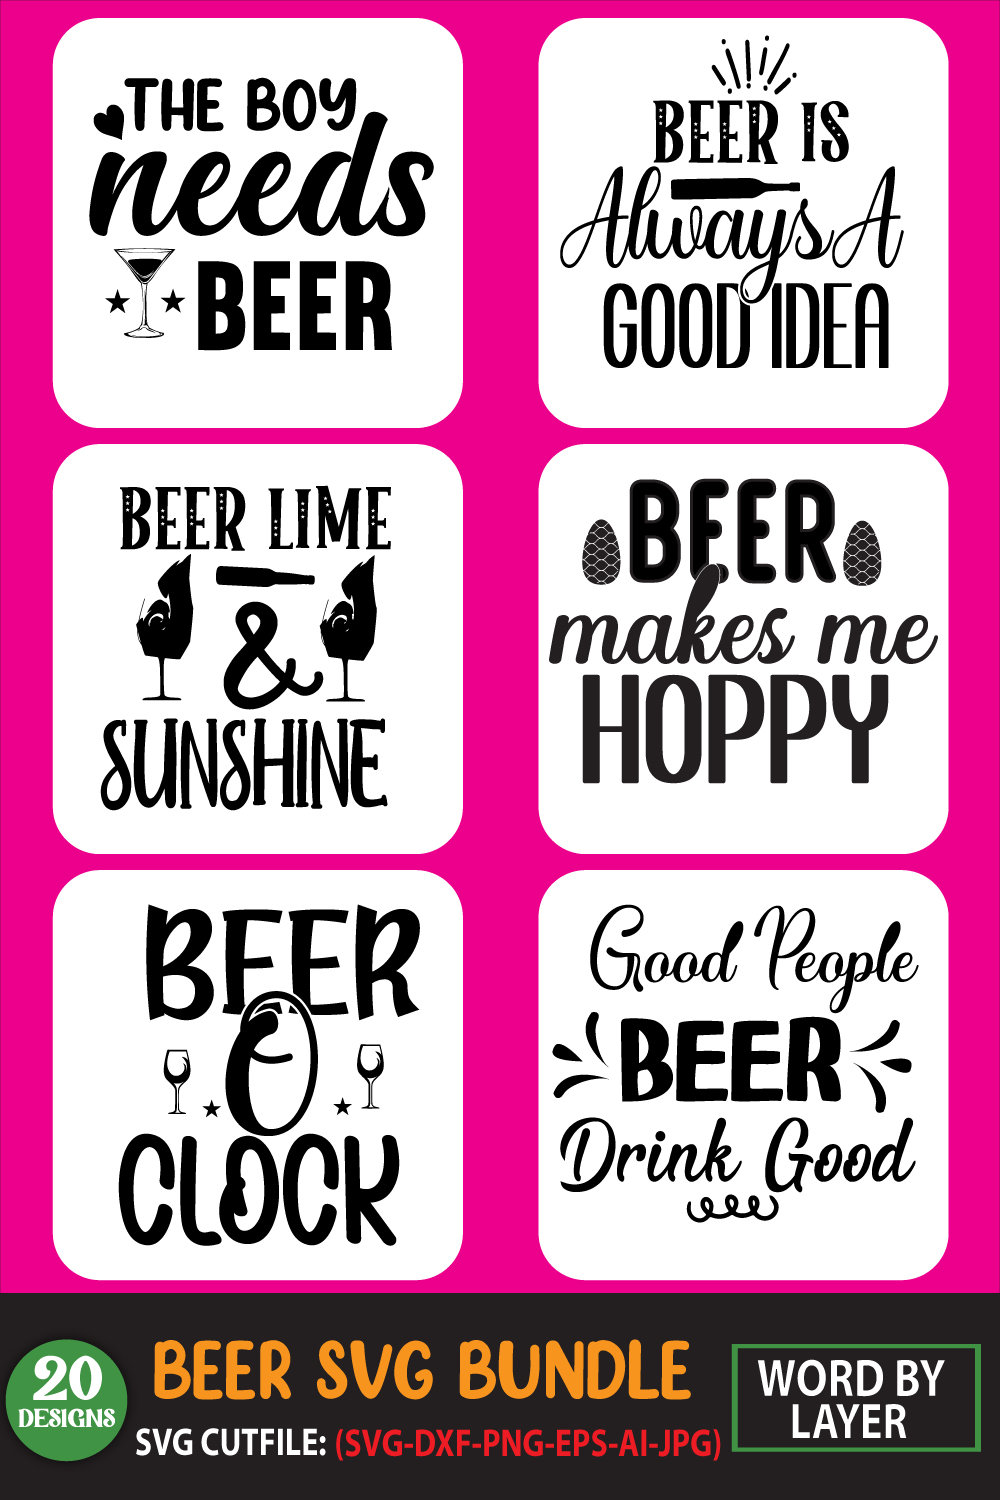 A selection of gorgeous images for prints on the theme of beer